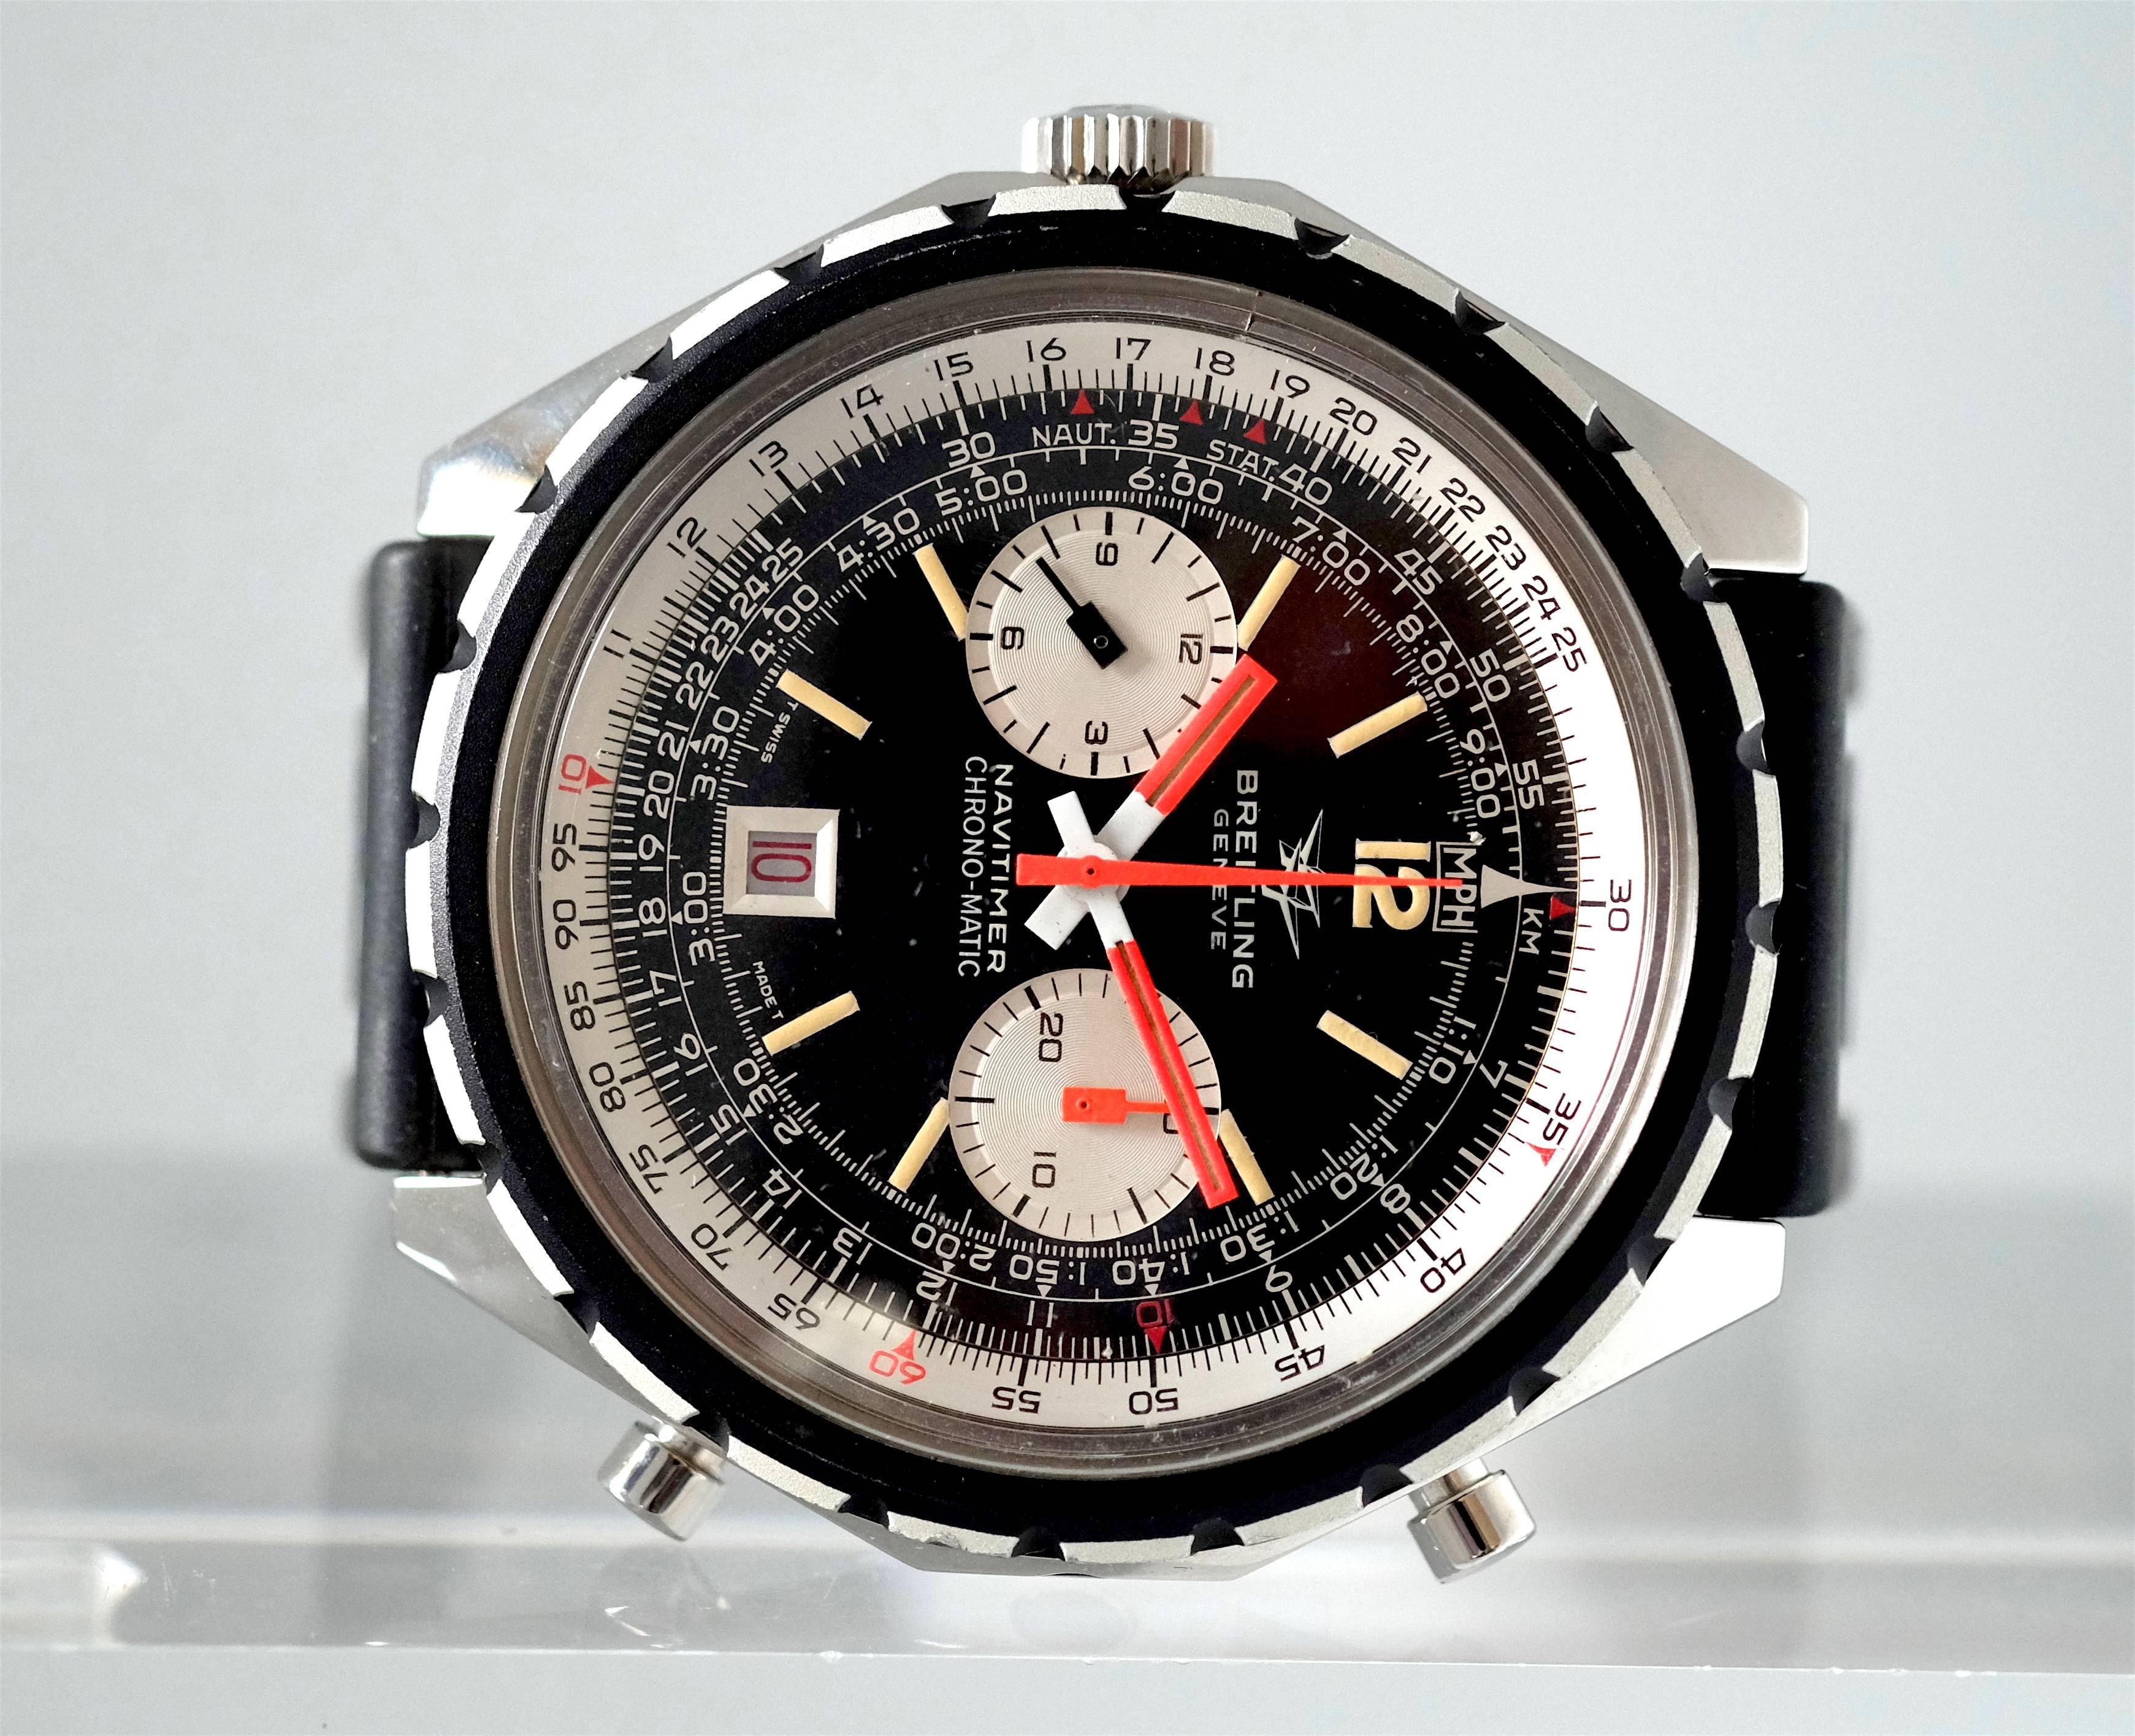 An automatic Chronograph from Breitling in Stainless steel ref 1806

Circa:1970's

Case: Three-body, polished, nudged black bezel, screwed-down case back, lapidated lugs;  chronograph pushers at 2 and 4 o'clock. Case is in excellent condition